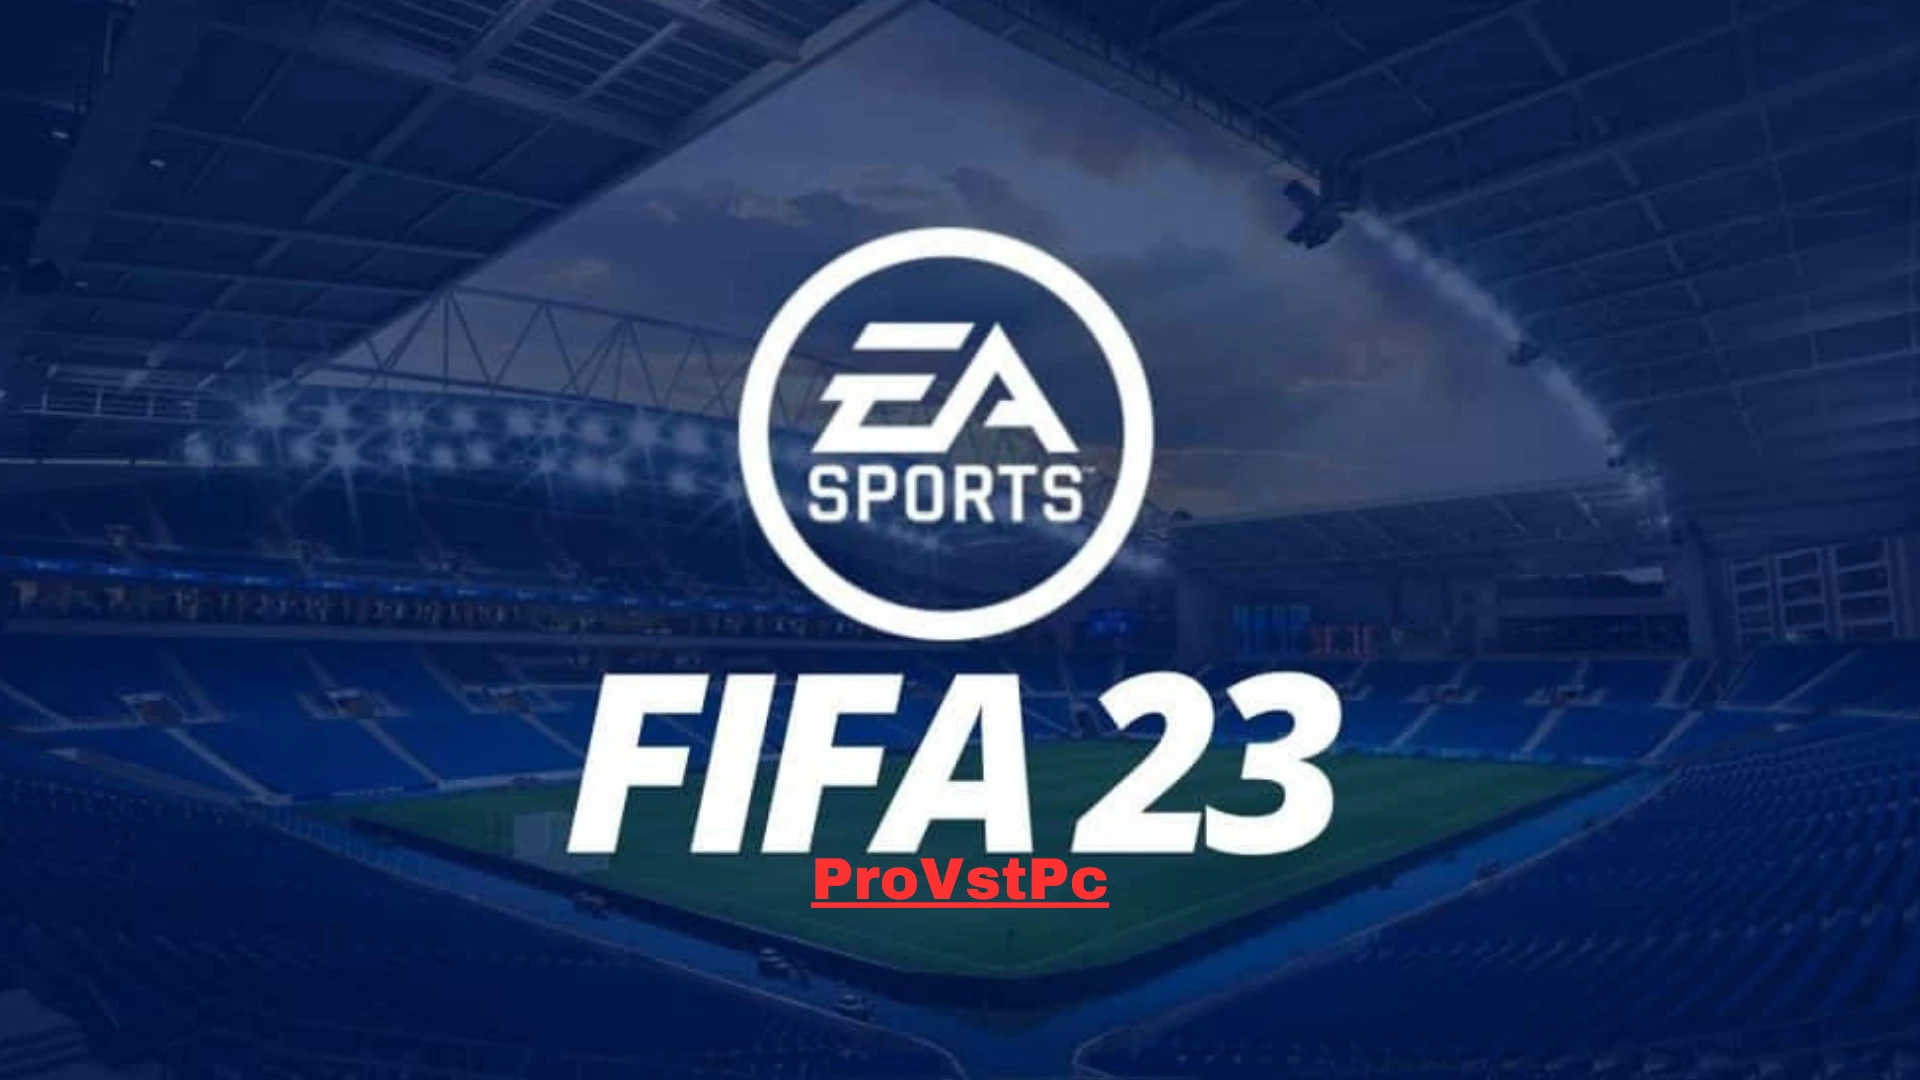 fifa 23 download pc Activation key downlode｜TikTok Search